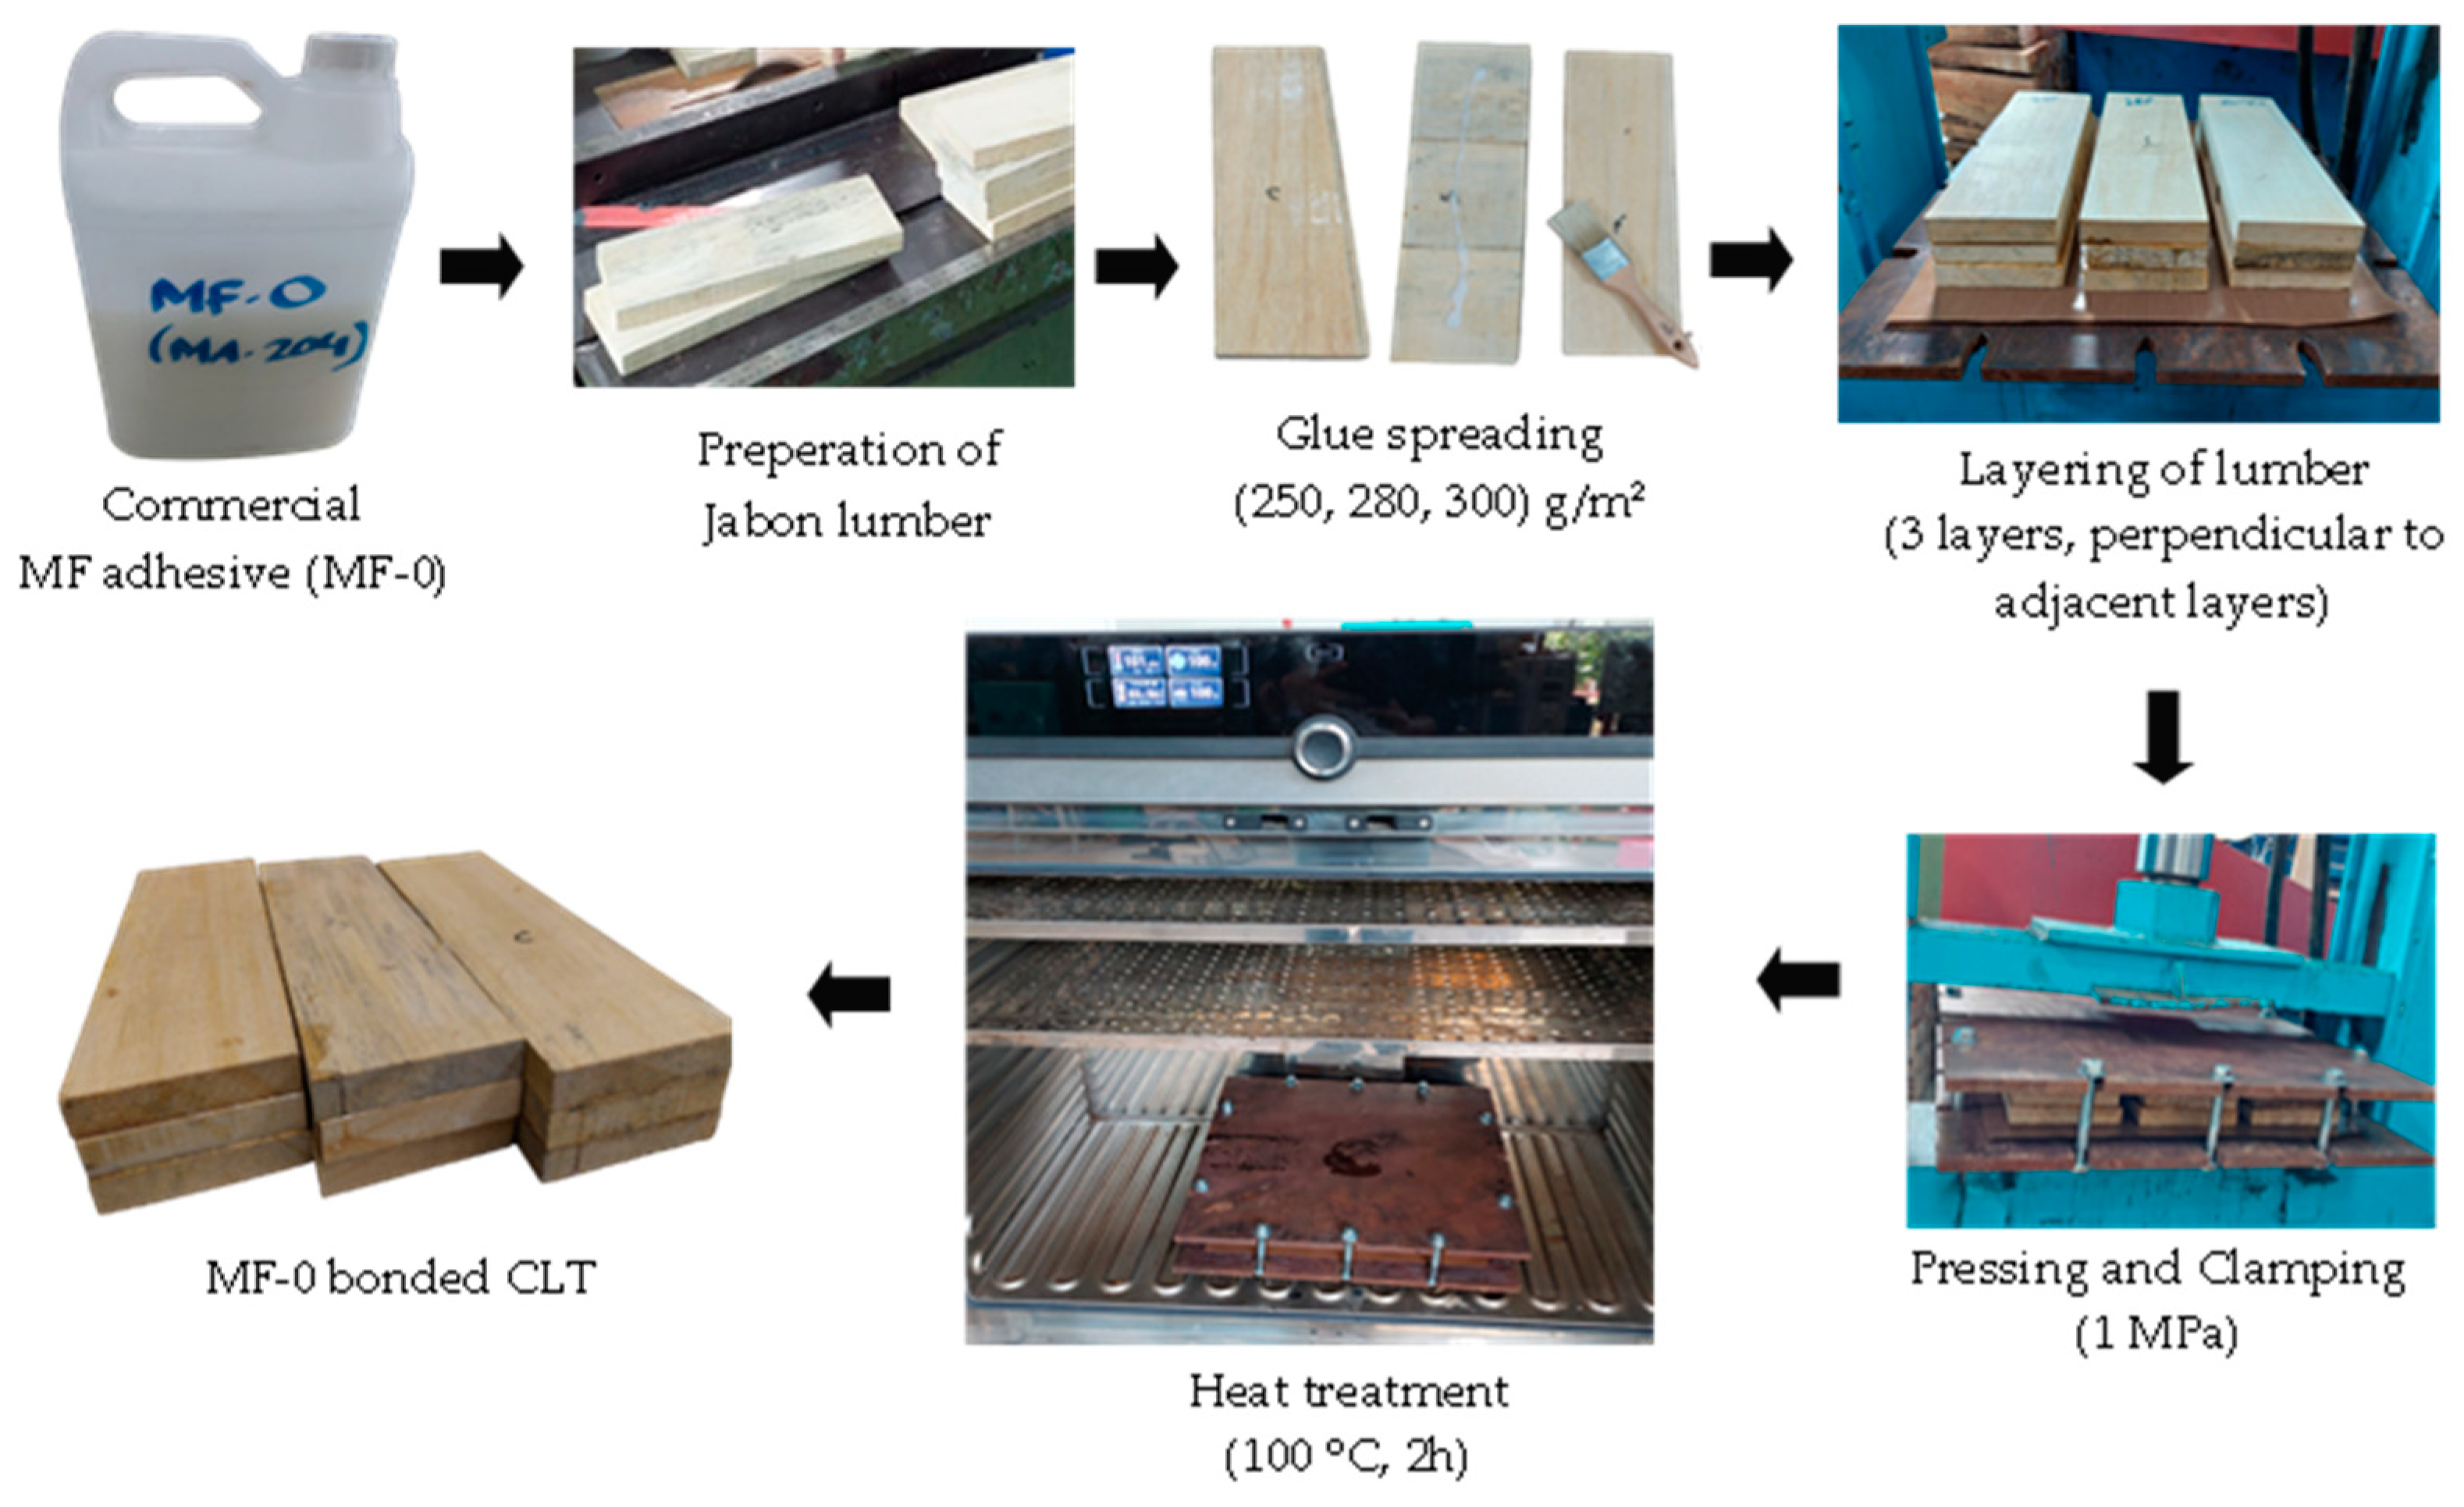 Polymers | Free Full-Text | Effect of Glue Spread on Bonding Strength,  Delamination, and Wood Failure of Jabon Wood-Based Cross-Laminated Timber  Using Cold-Setting Melamine-Based Adhesive